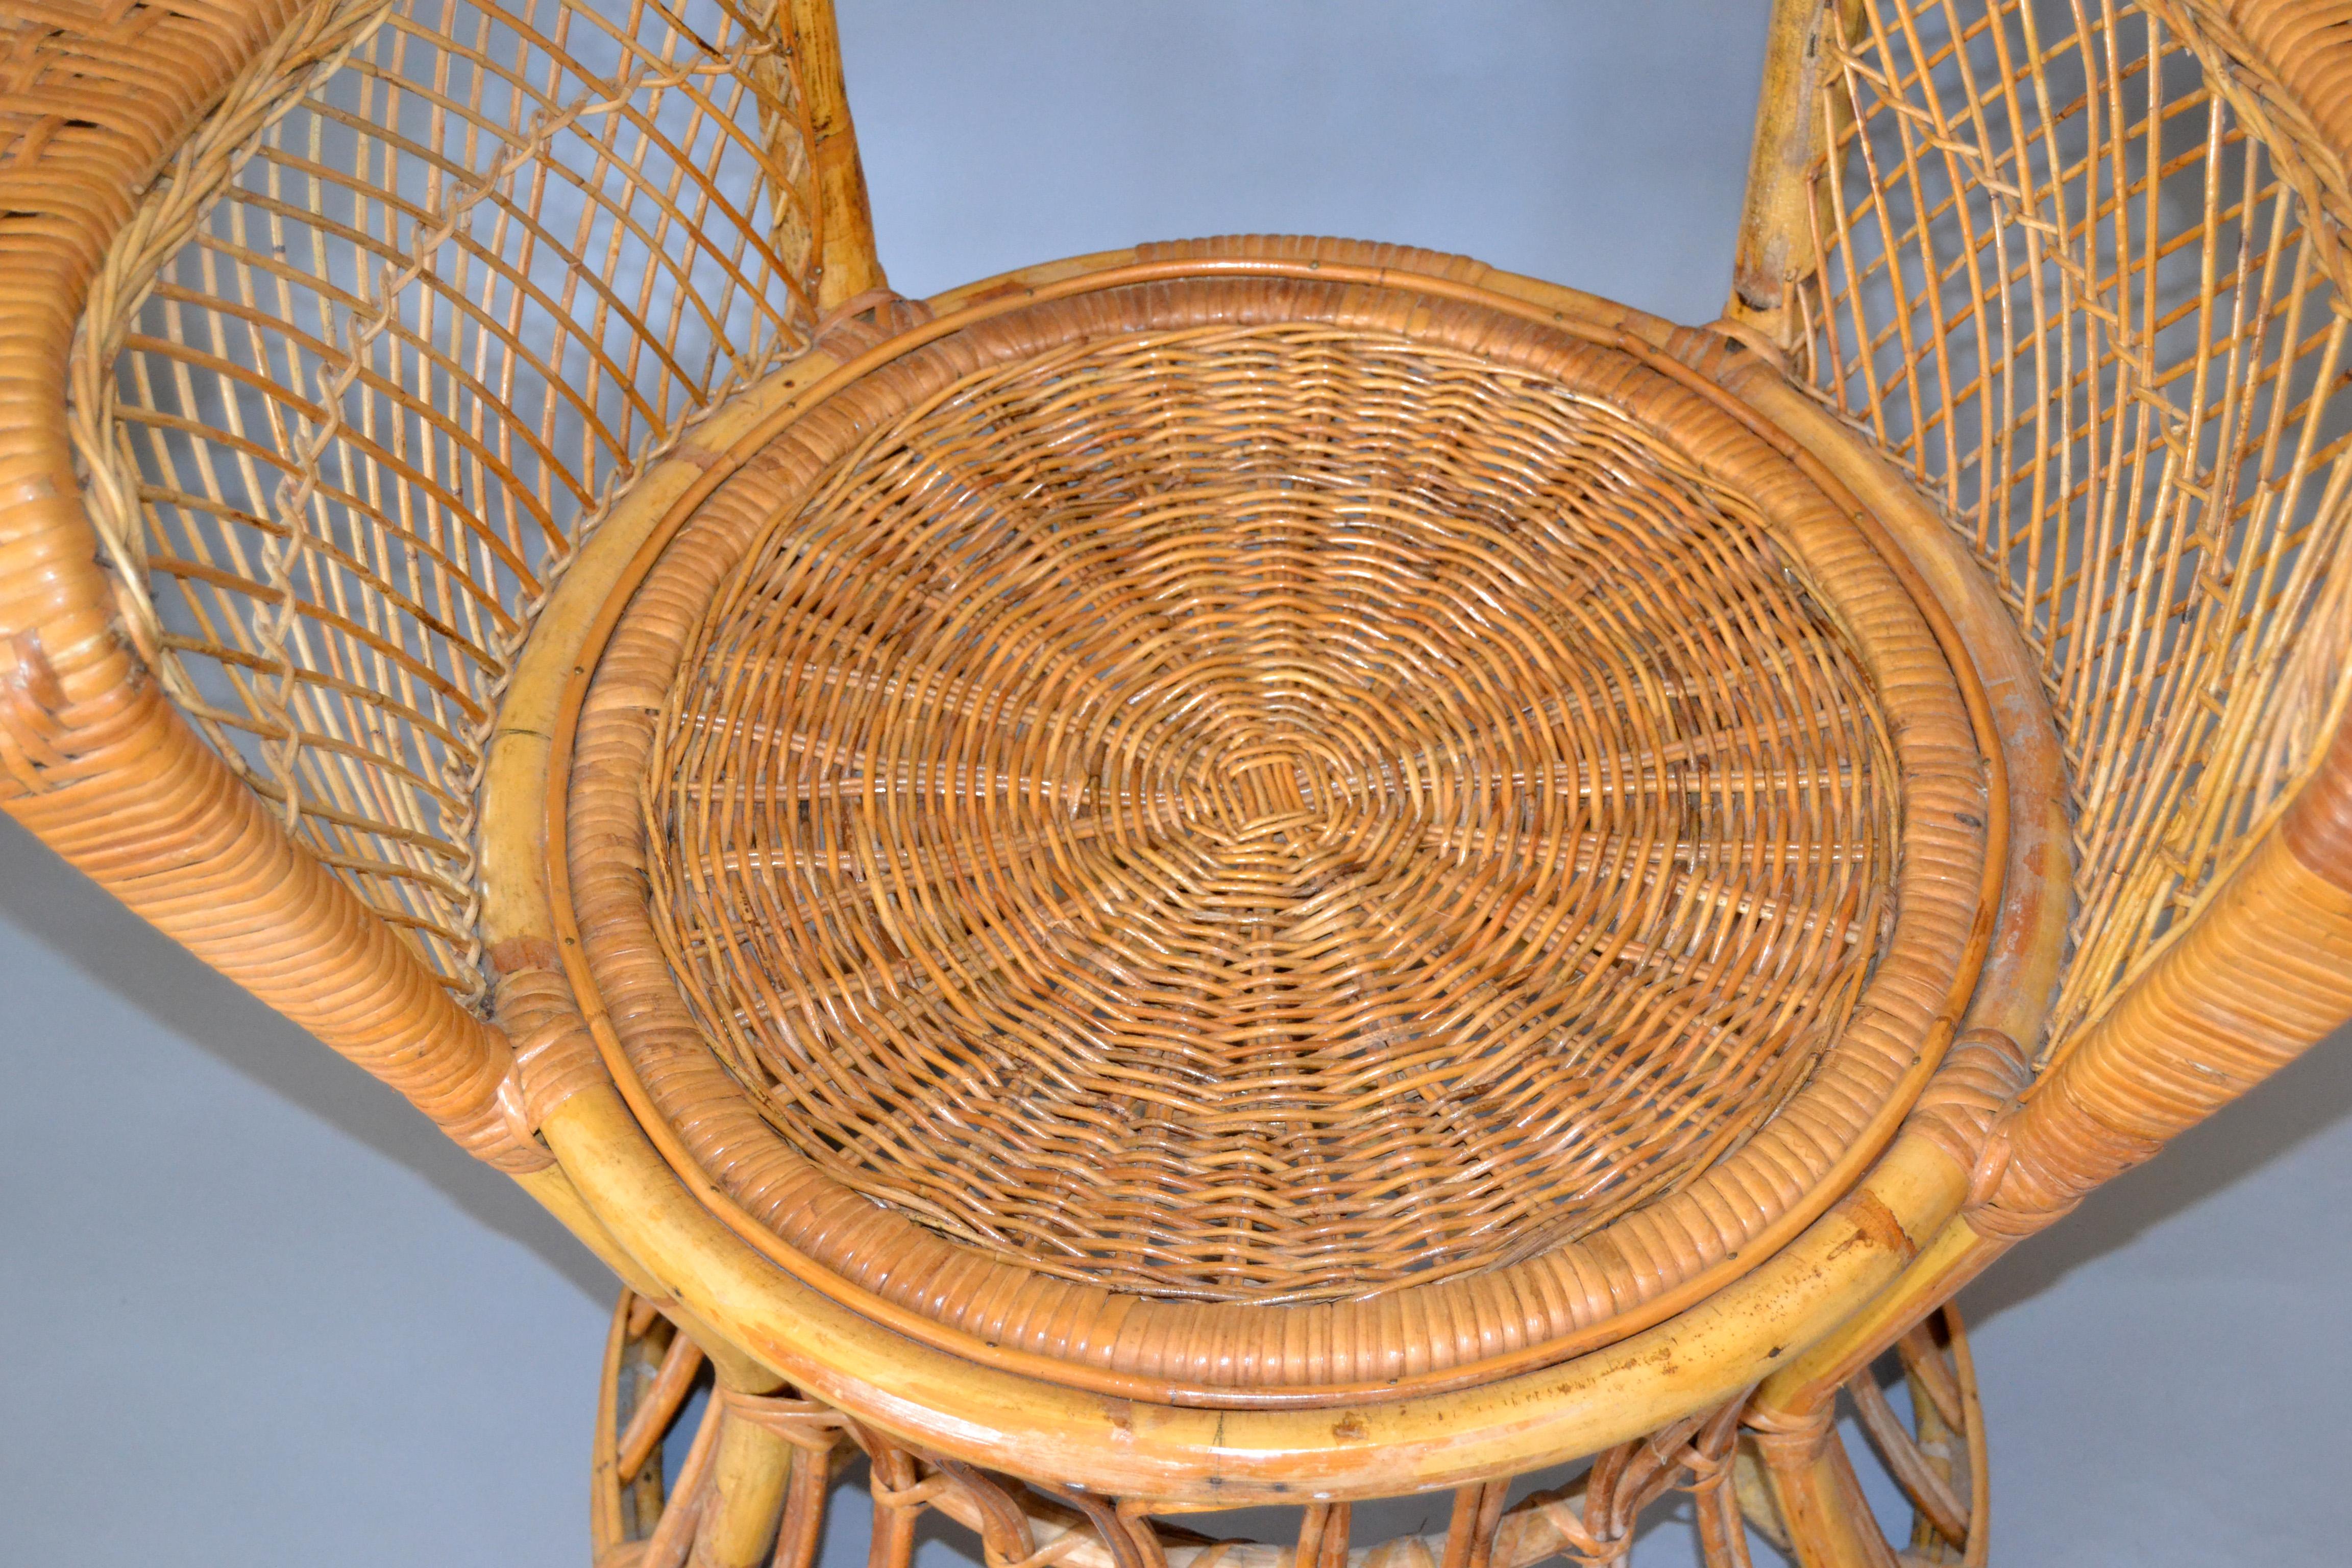 Bohemian Vintage Boho Chic Handcrafted Wicker, Rattan and Reed Peacock High Back Chair